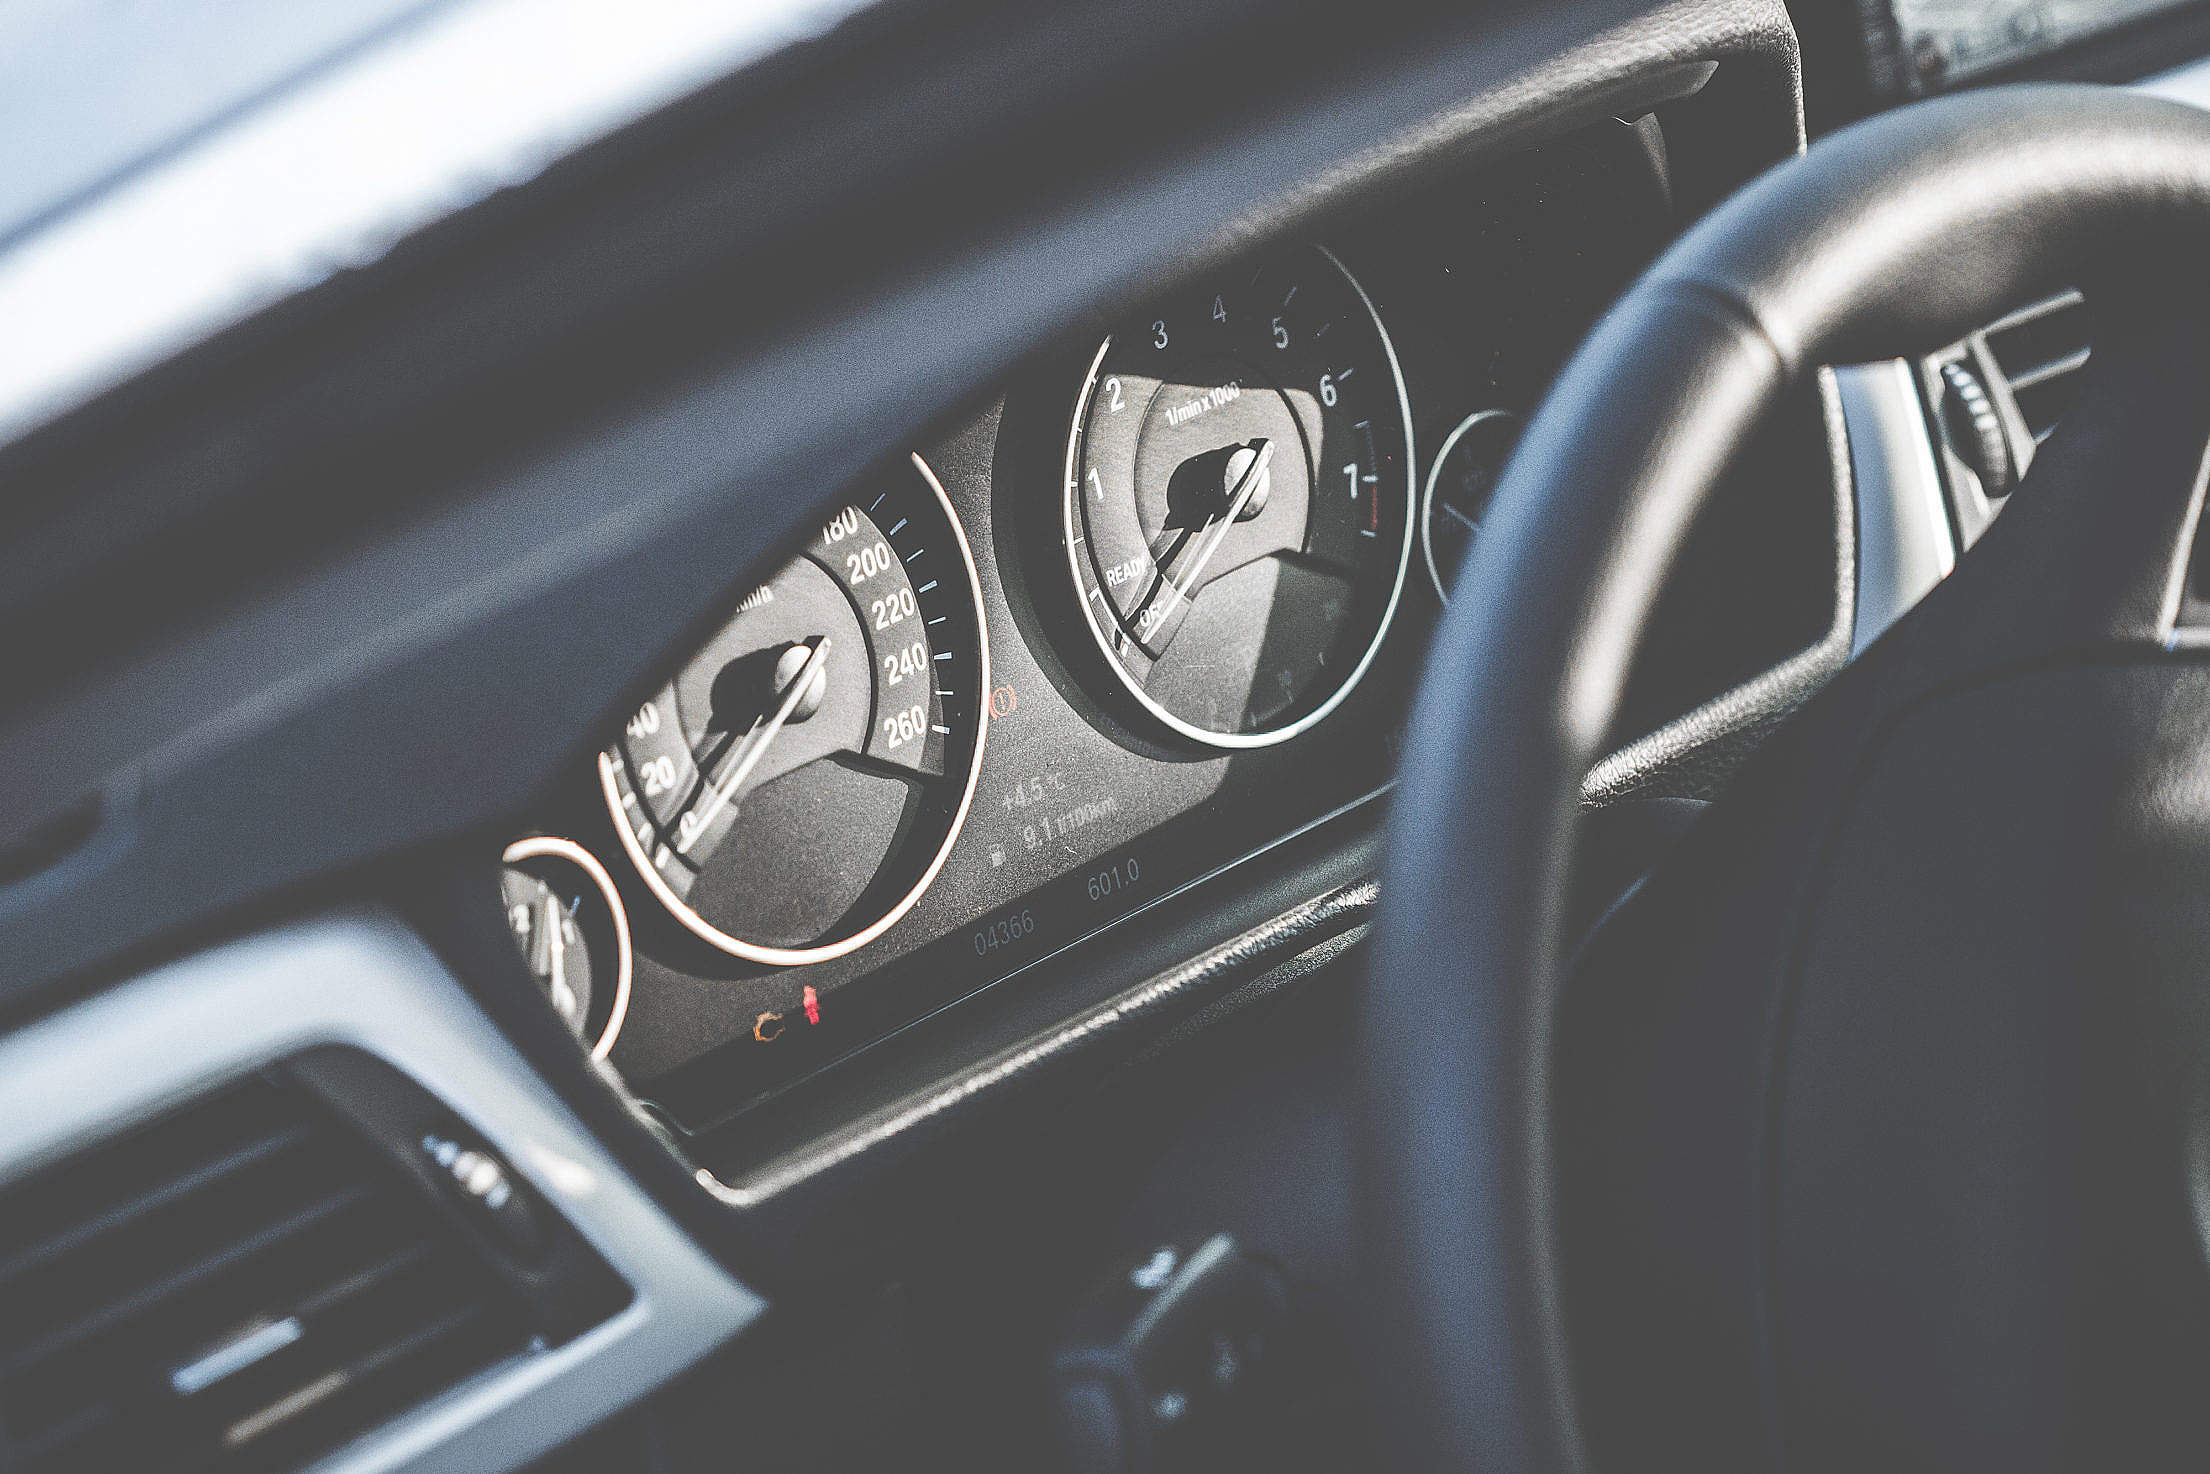 New Modern Car Dashboard with Speedometer and Tachometer Free Stock Photo